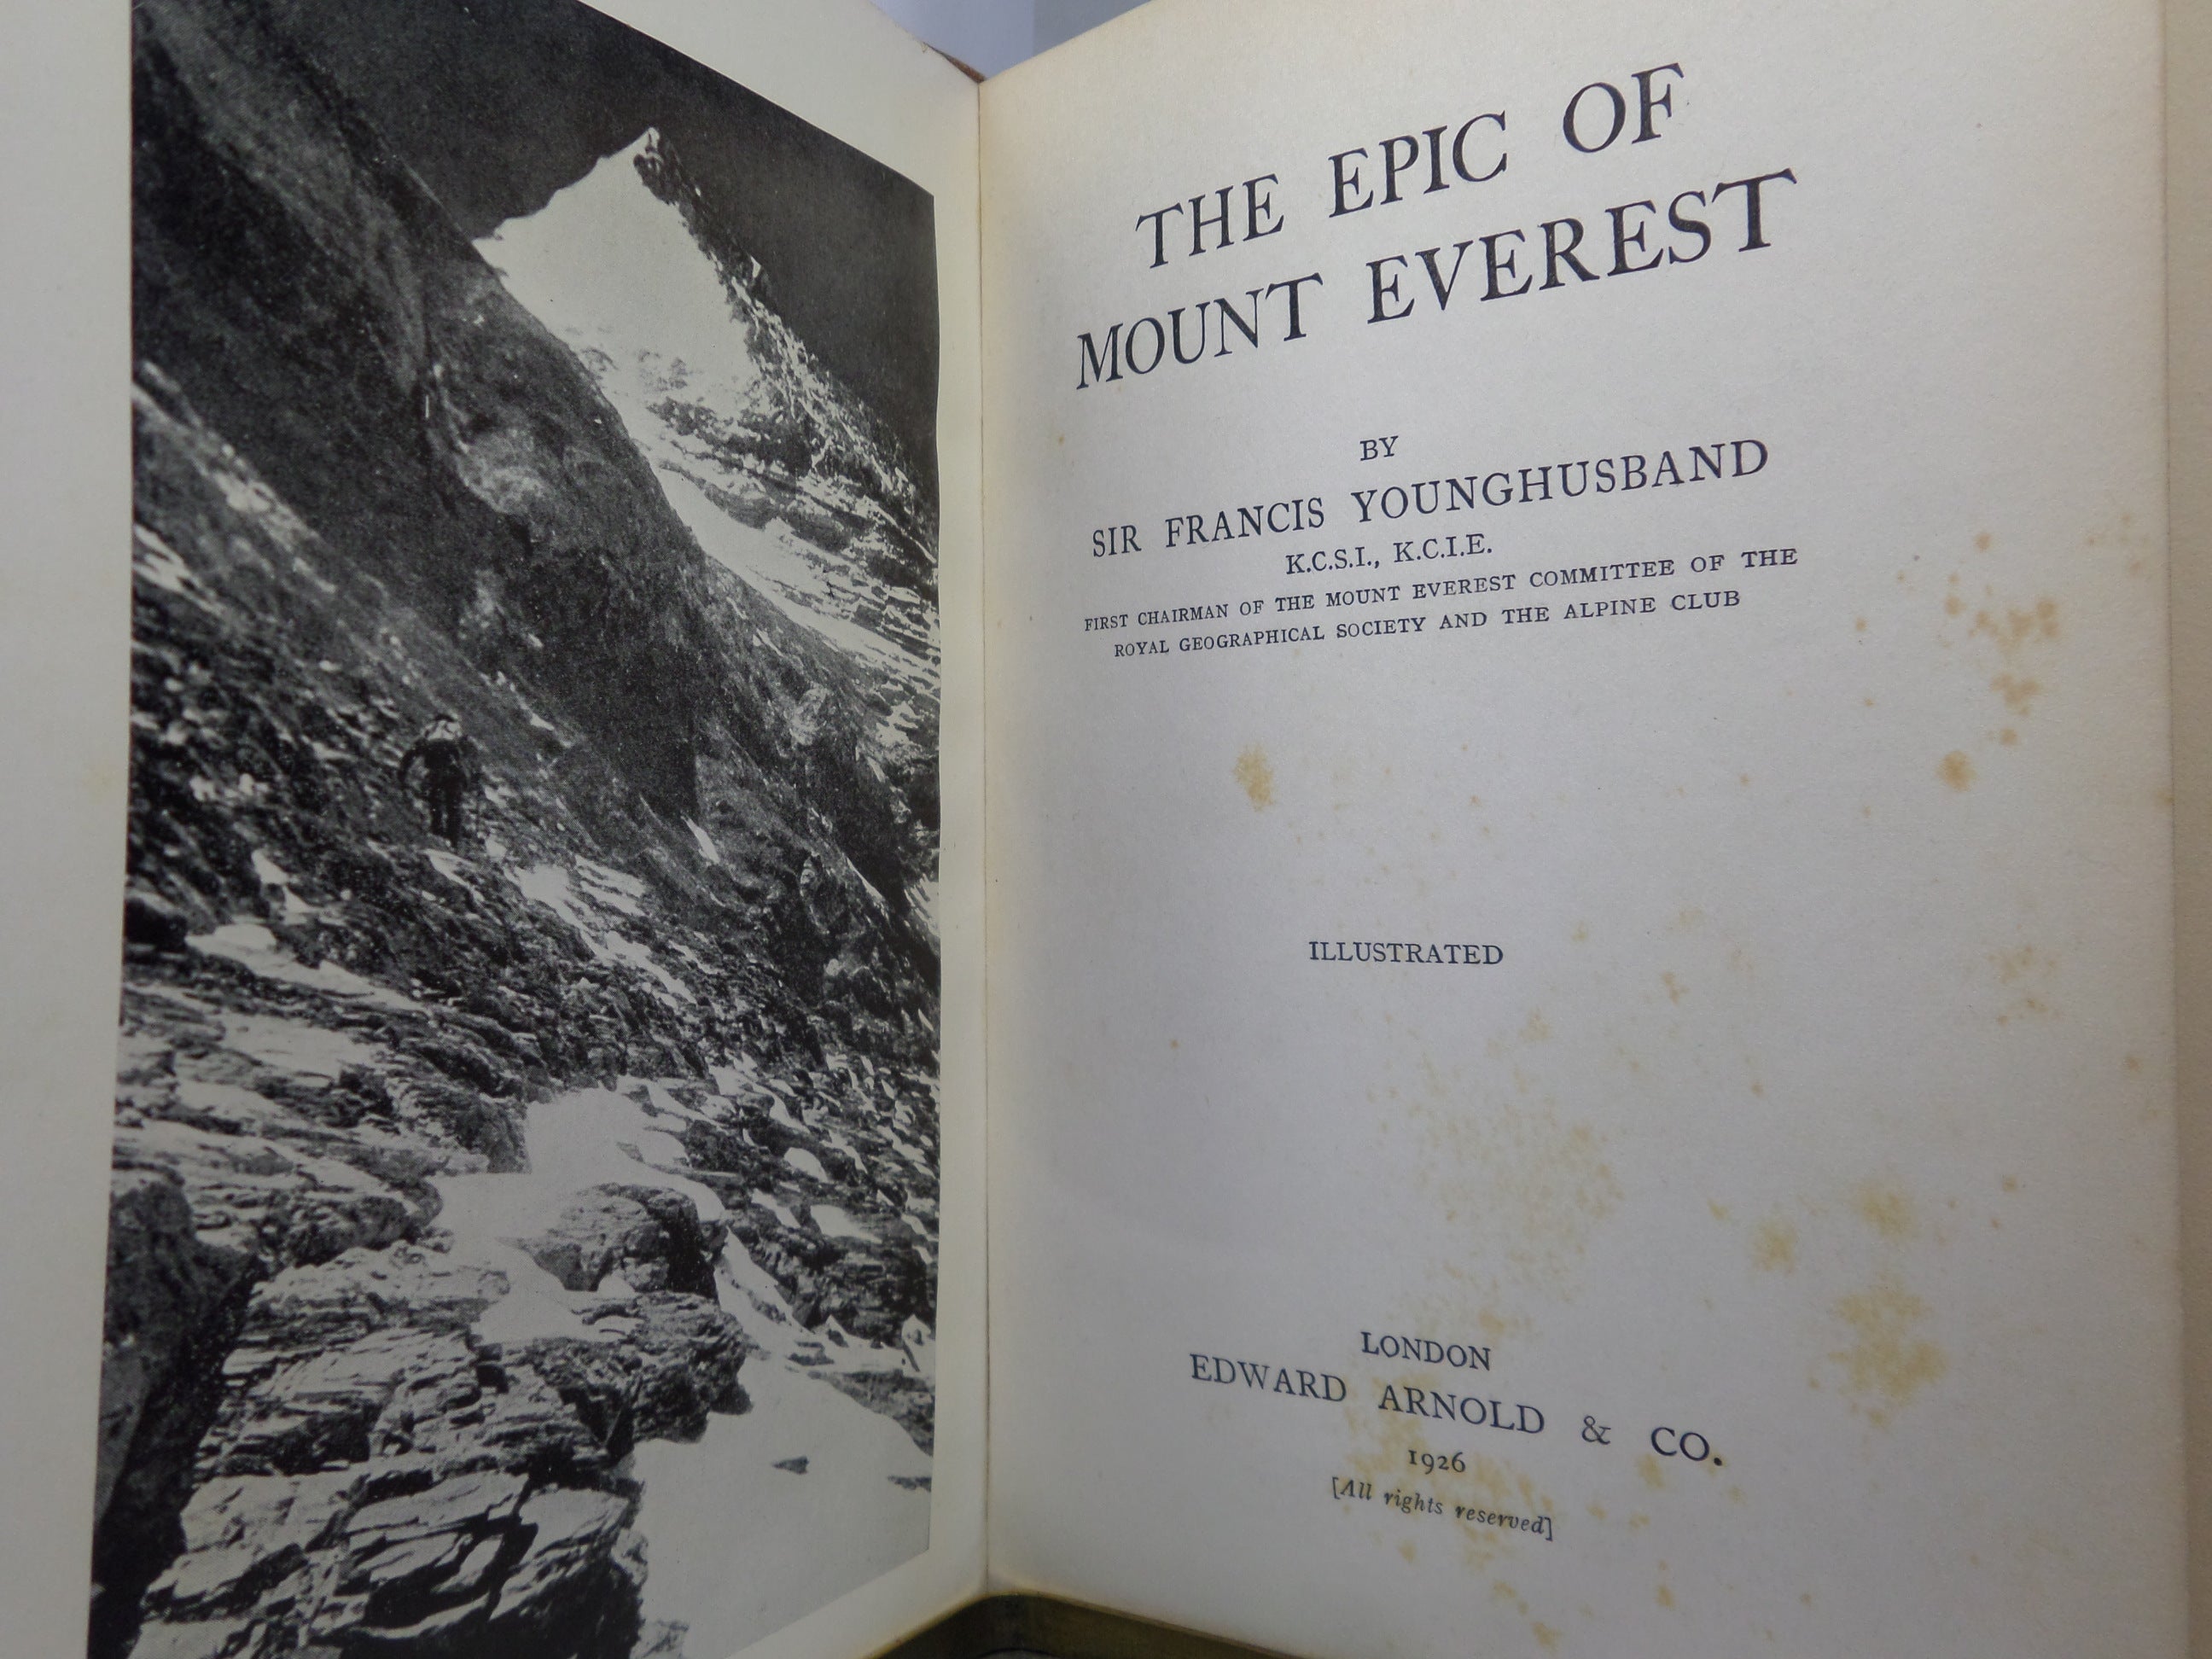 THE EPIC OF MOUNT EVEREST BY SIR FRANCIS YOUNGHUSBAND 1926 SIGNED FIRST EDITION